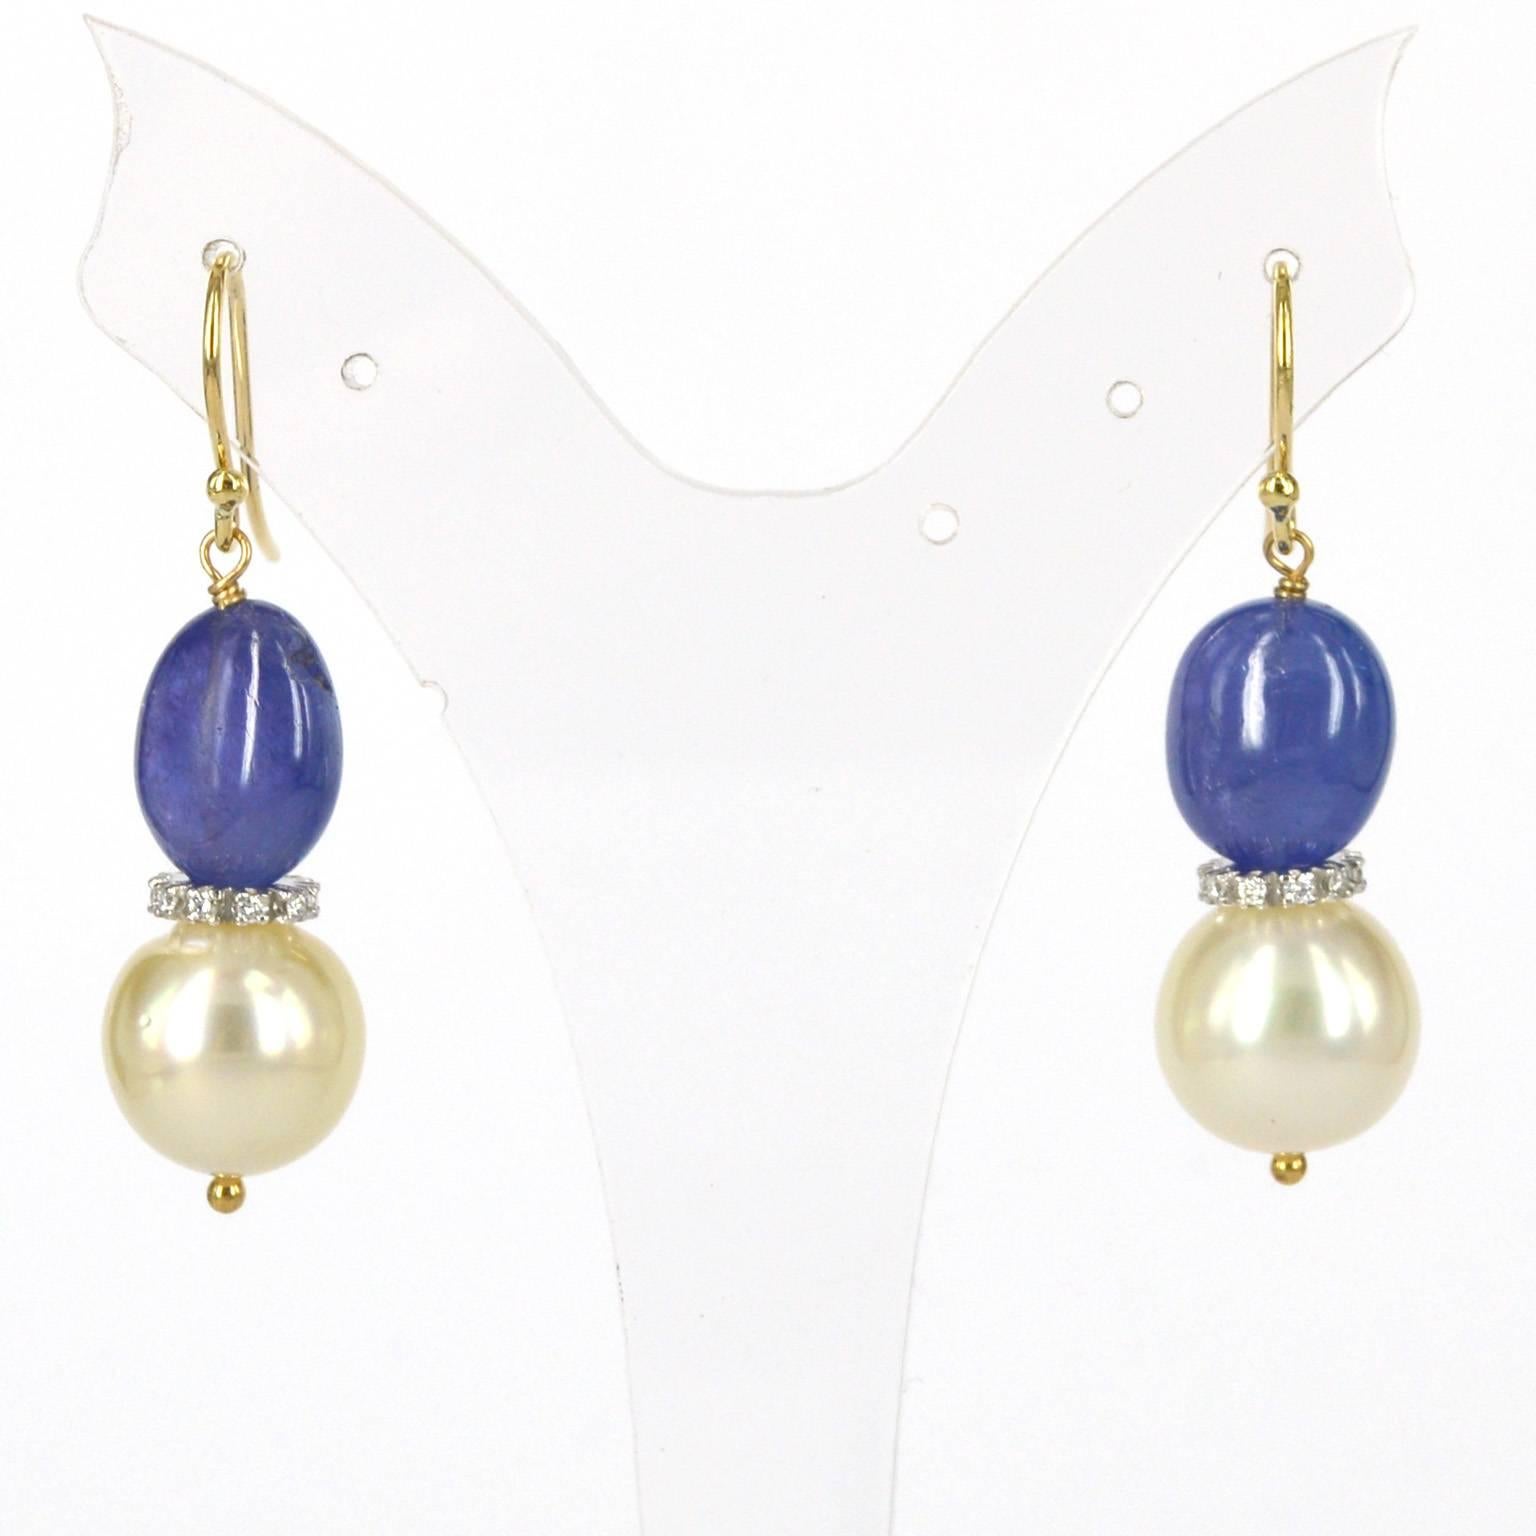 14k Gold Earrings with beautiful matching Tanzanite nuggets and round South Sea Pearls.
Pearls measure 12.2 and 12.6mm
Tanzanite nuggets measure 10x13mm
14k white Gold and diamond roundel beads with 10 x 1 pointer diamonds in each.
Total length of